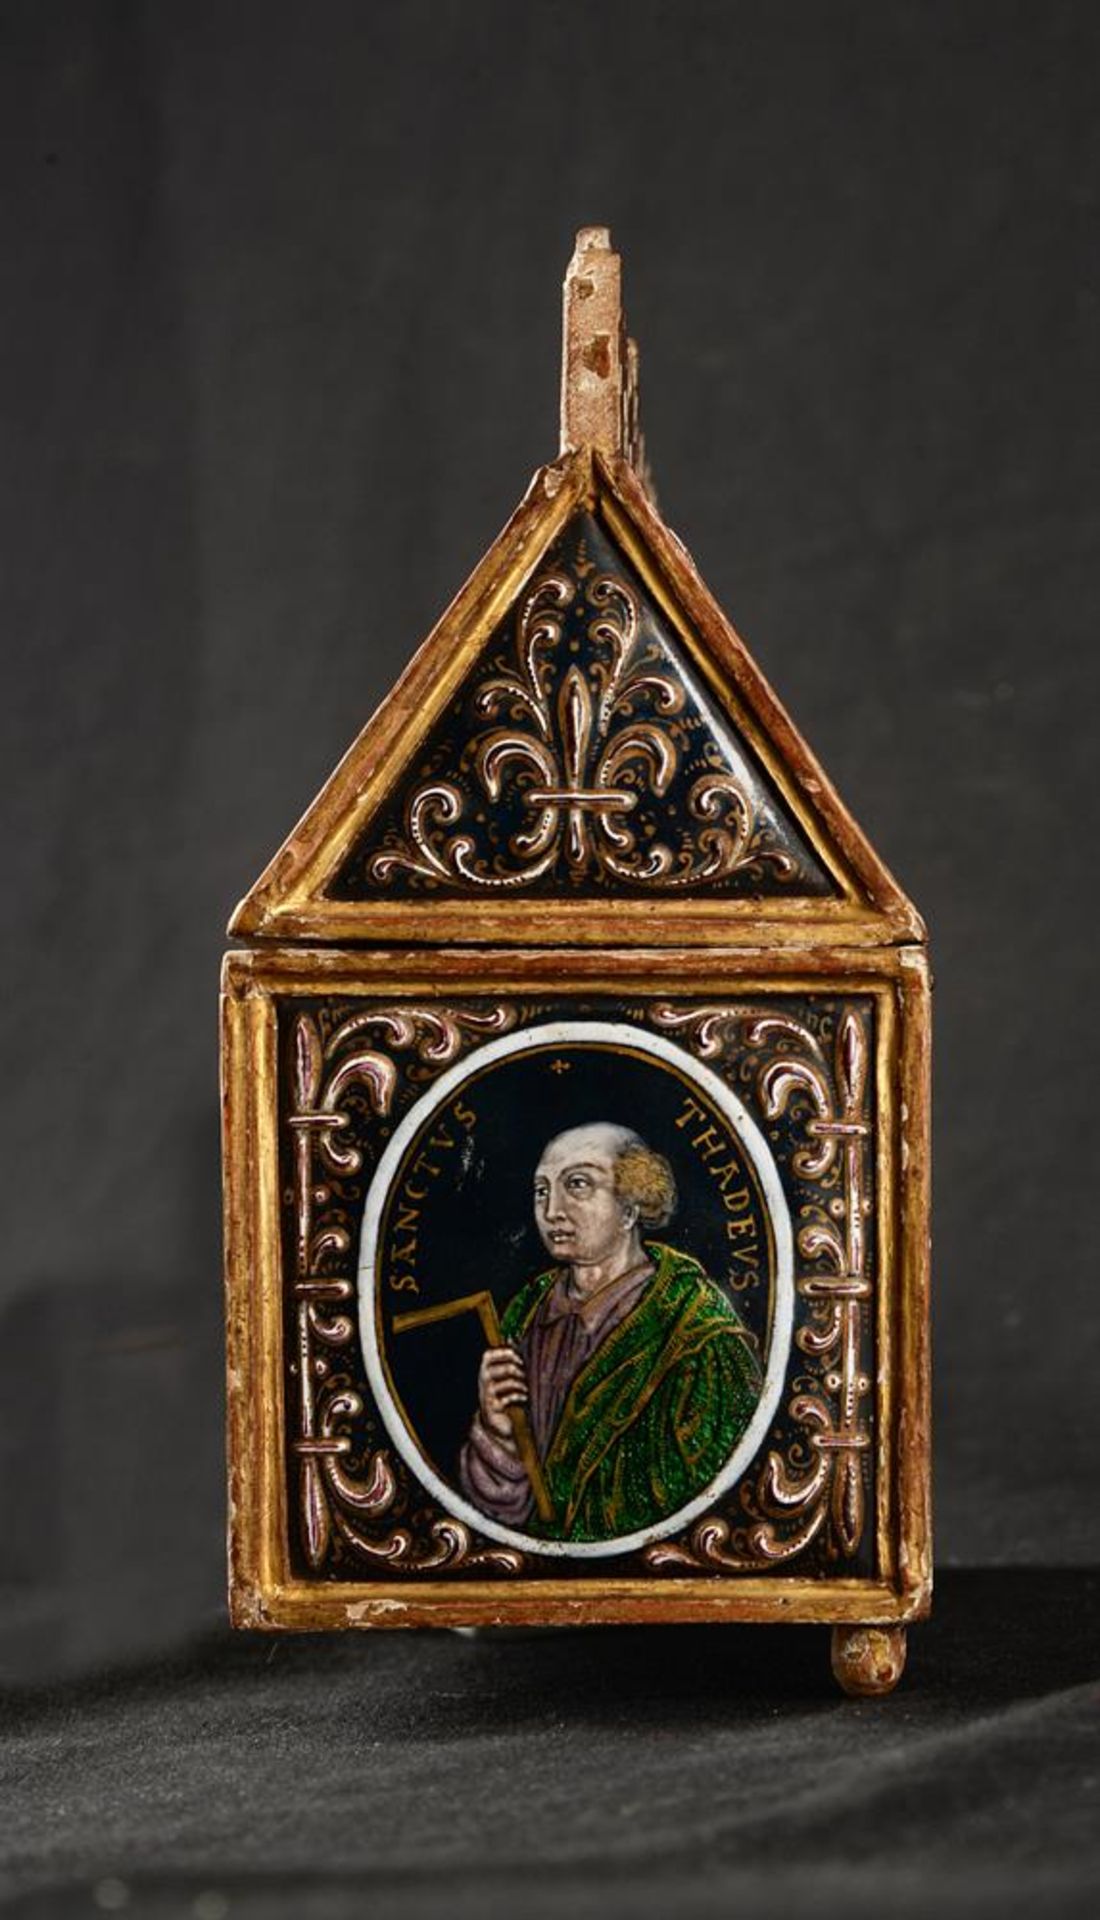 A GILTWOOD AND ENAMEL SET CHASSE OR CASKET, IN THE 16TH CENTURY LIMOGES MANNER - Image 5 of 8